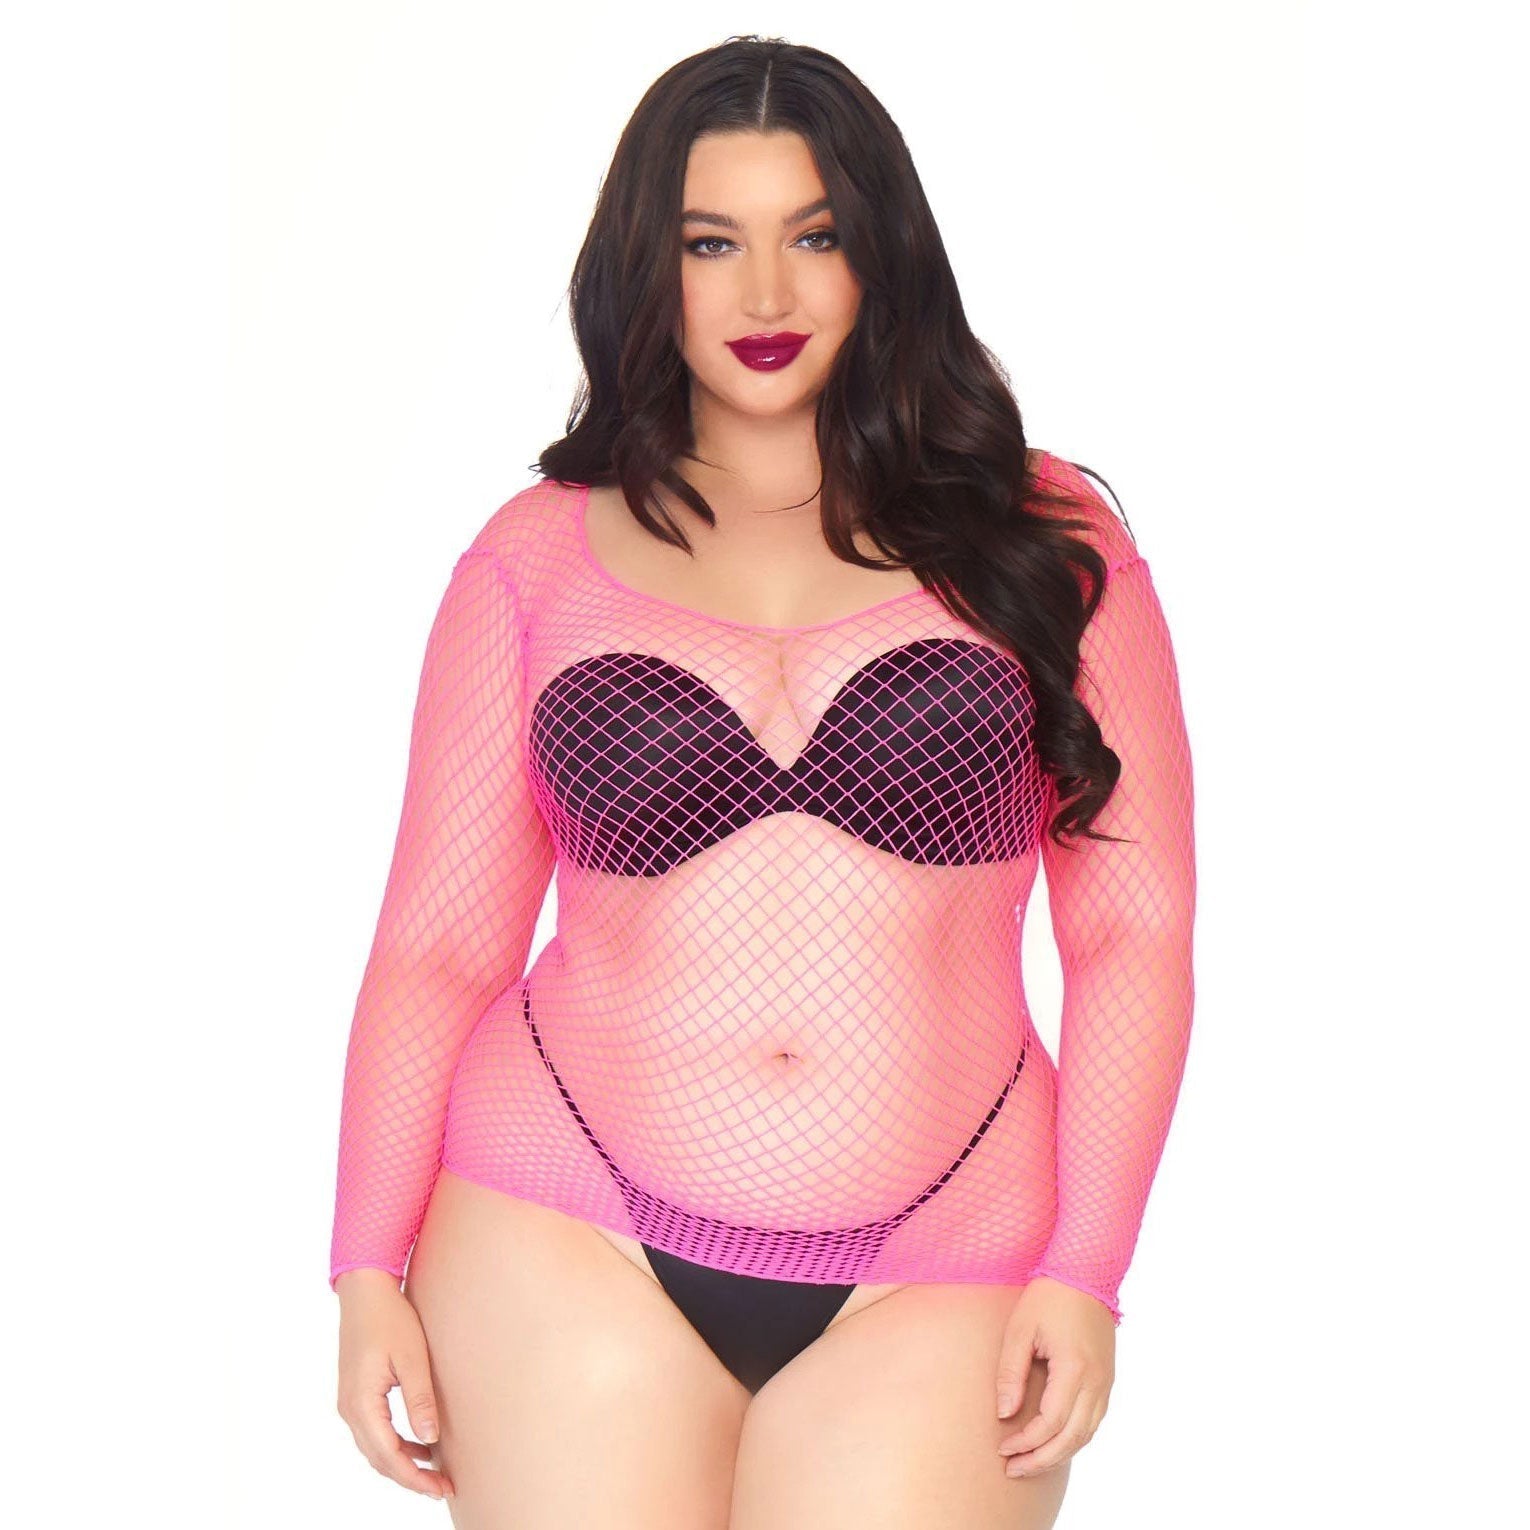 Vibrators, Sex Toy Kits and Sex Toys at Cloud9Adults - Leg Avenue Net Long Sleeved Shirt Plus Size UK 18 to 22 - Buy Sex Toys Online